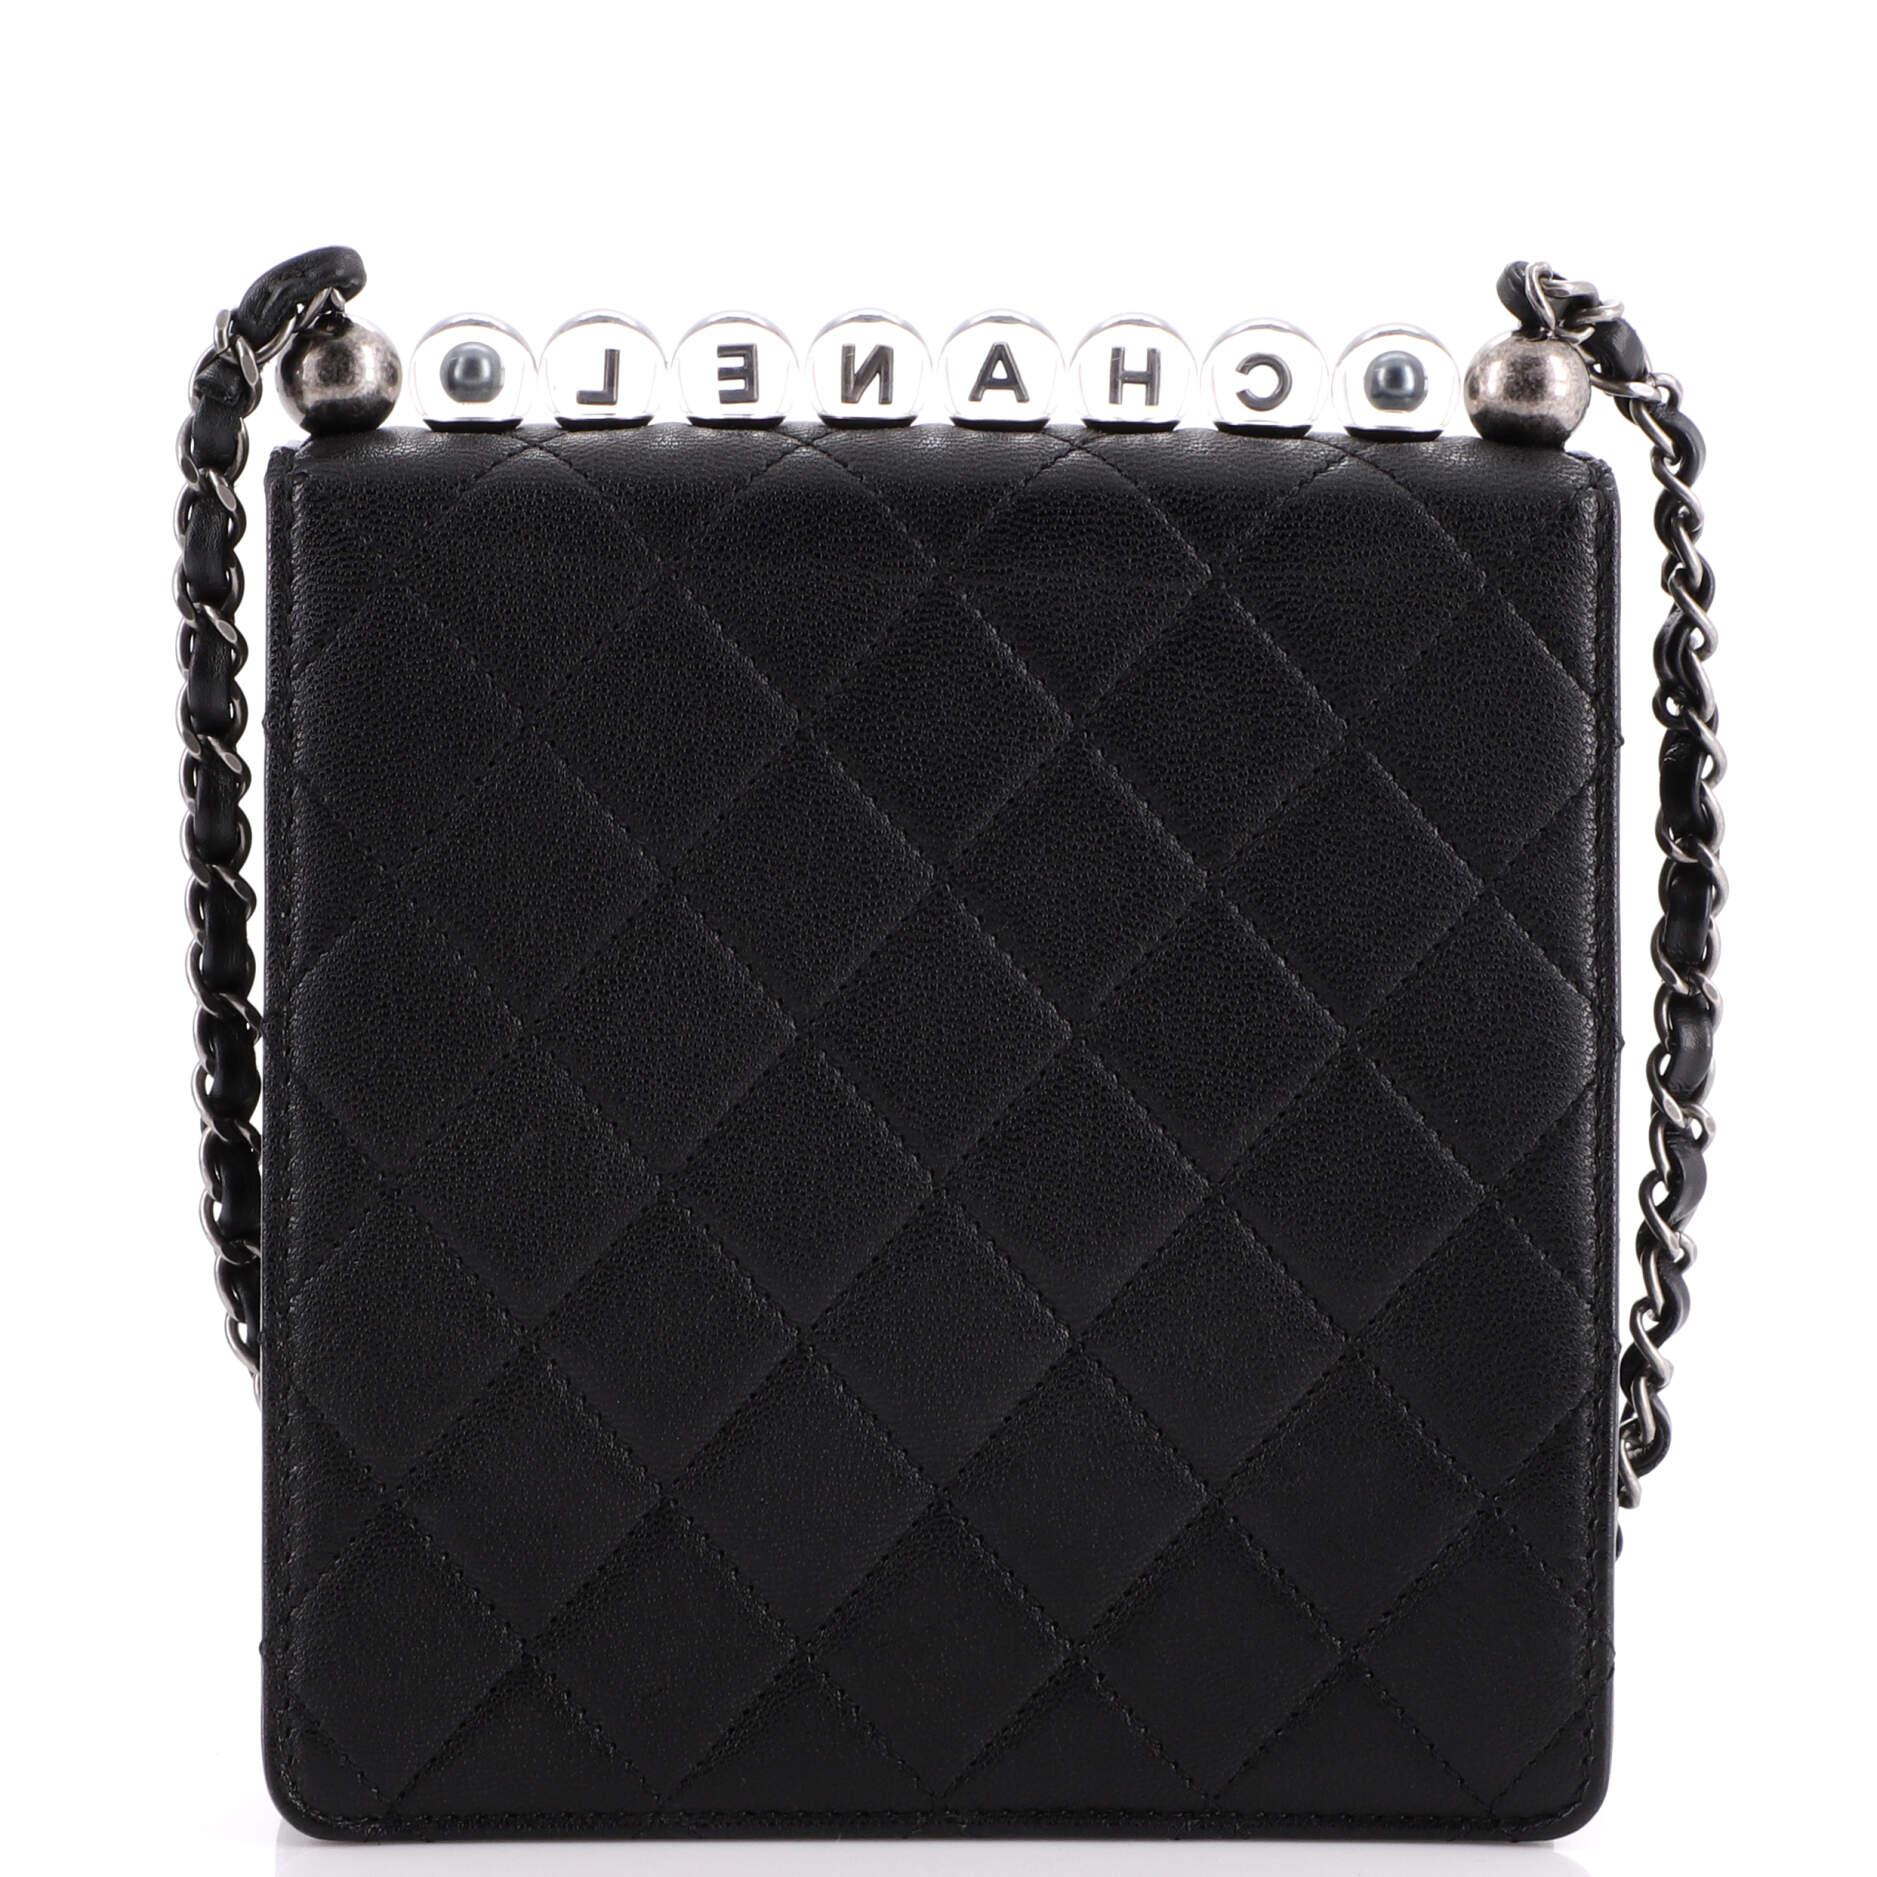 Women's Chanel Chic Pearls Flap Bag Quilted Goatskin with Acrylic Beads Mini